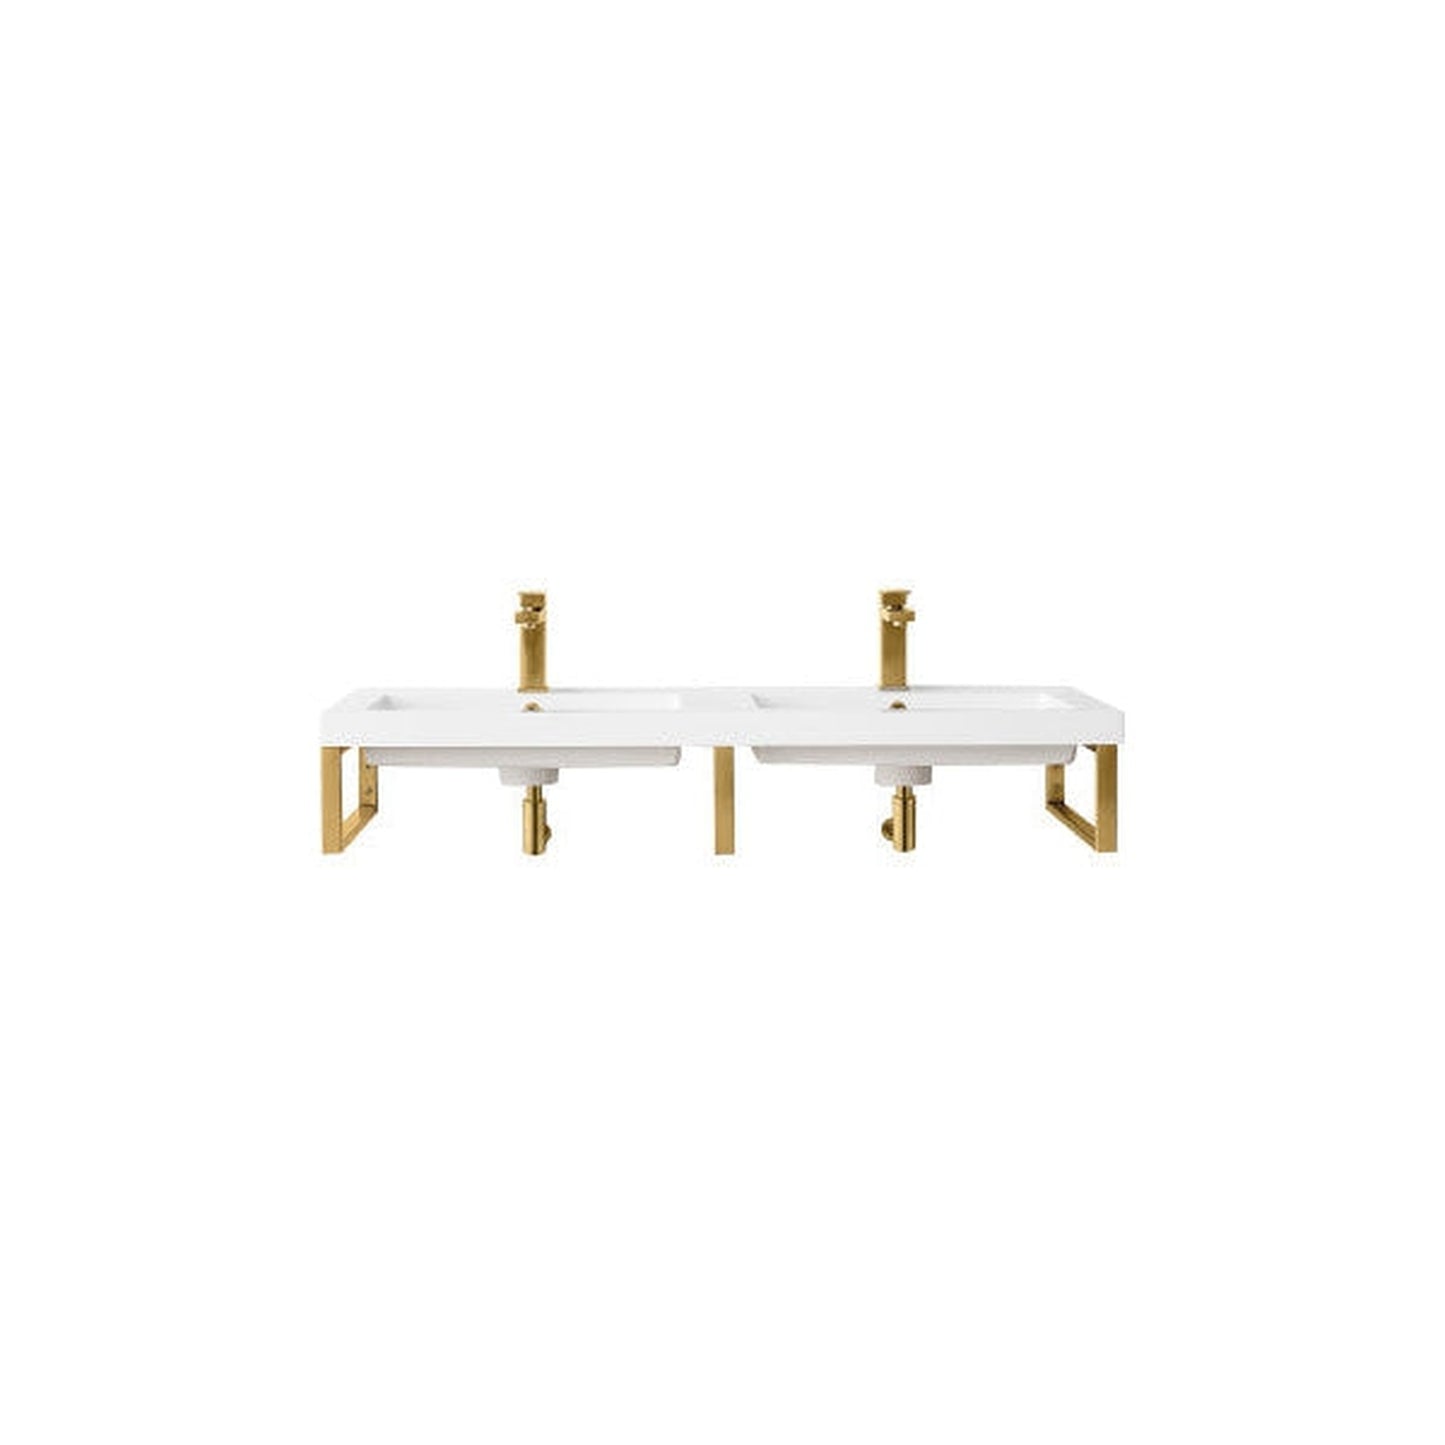 James Martin Boston 18" Three Radiant Gold Stainless Steel Wall Bracket With 47" White Glossy Composite Countertop